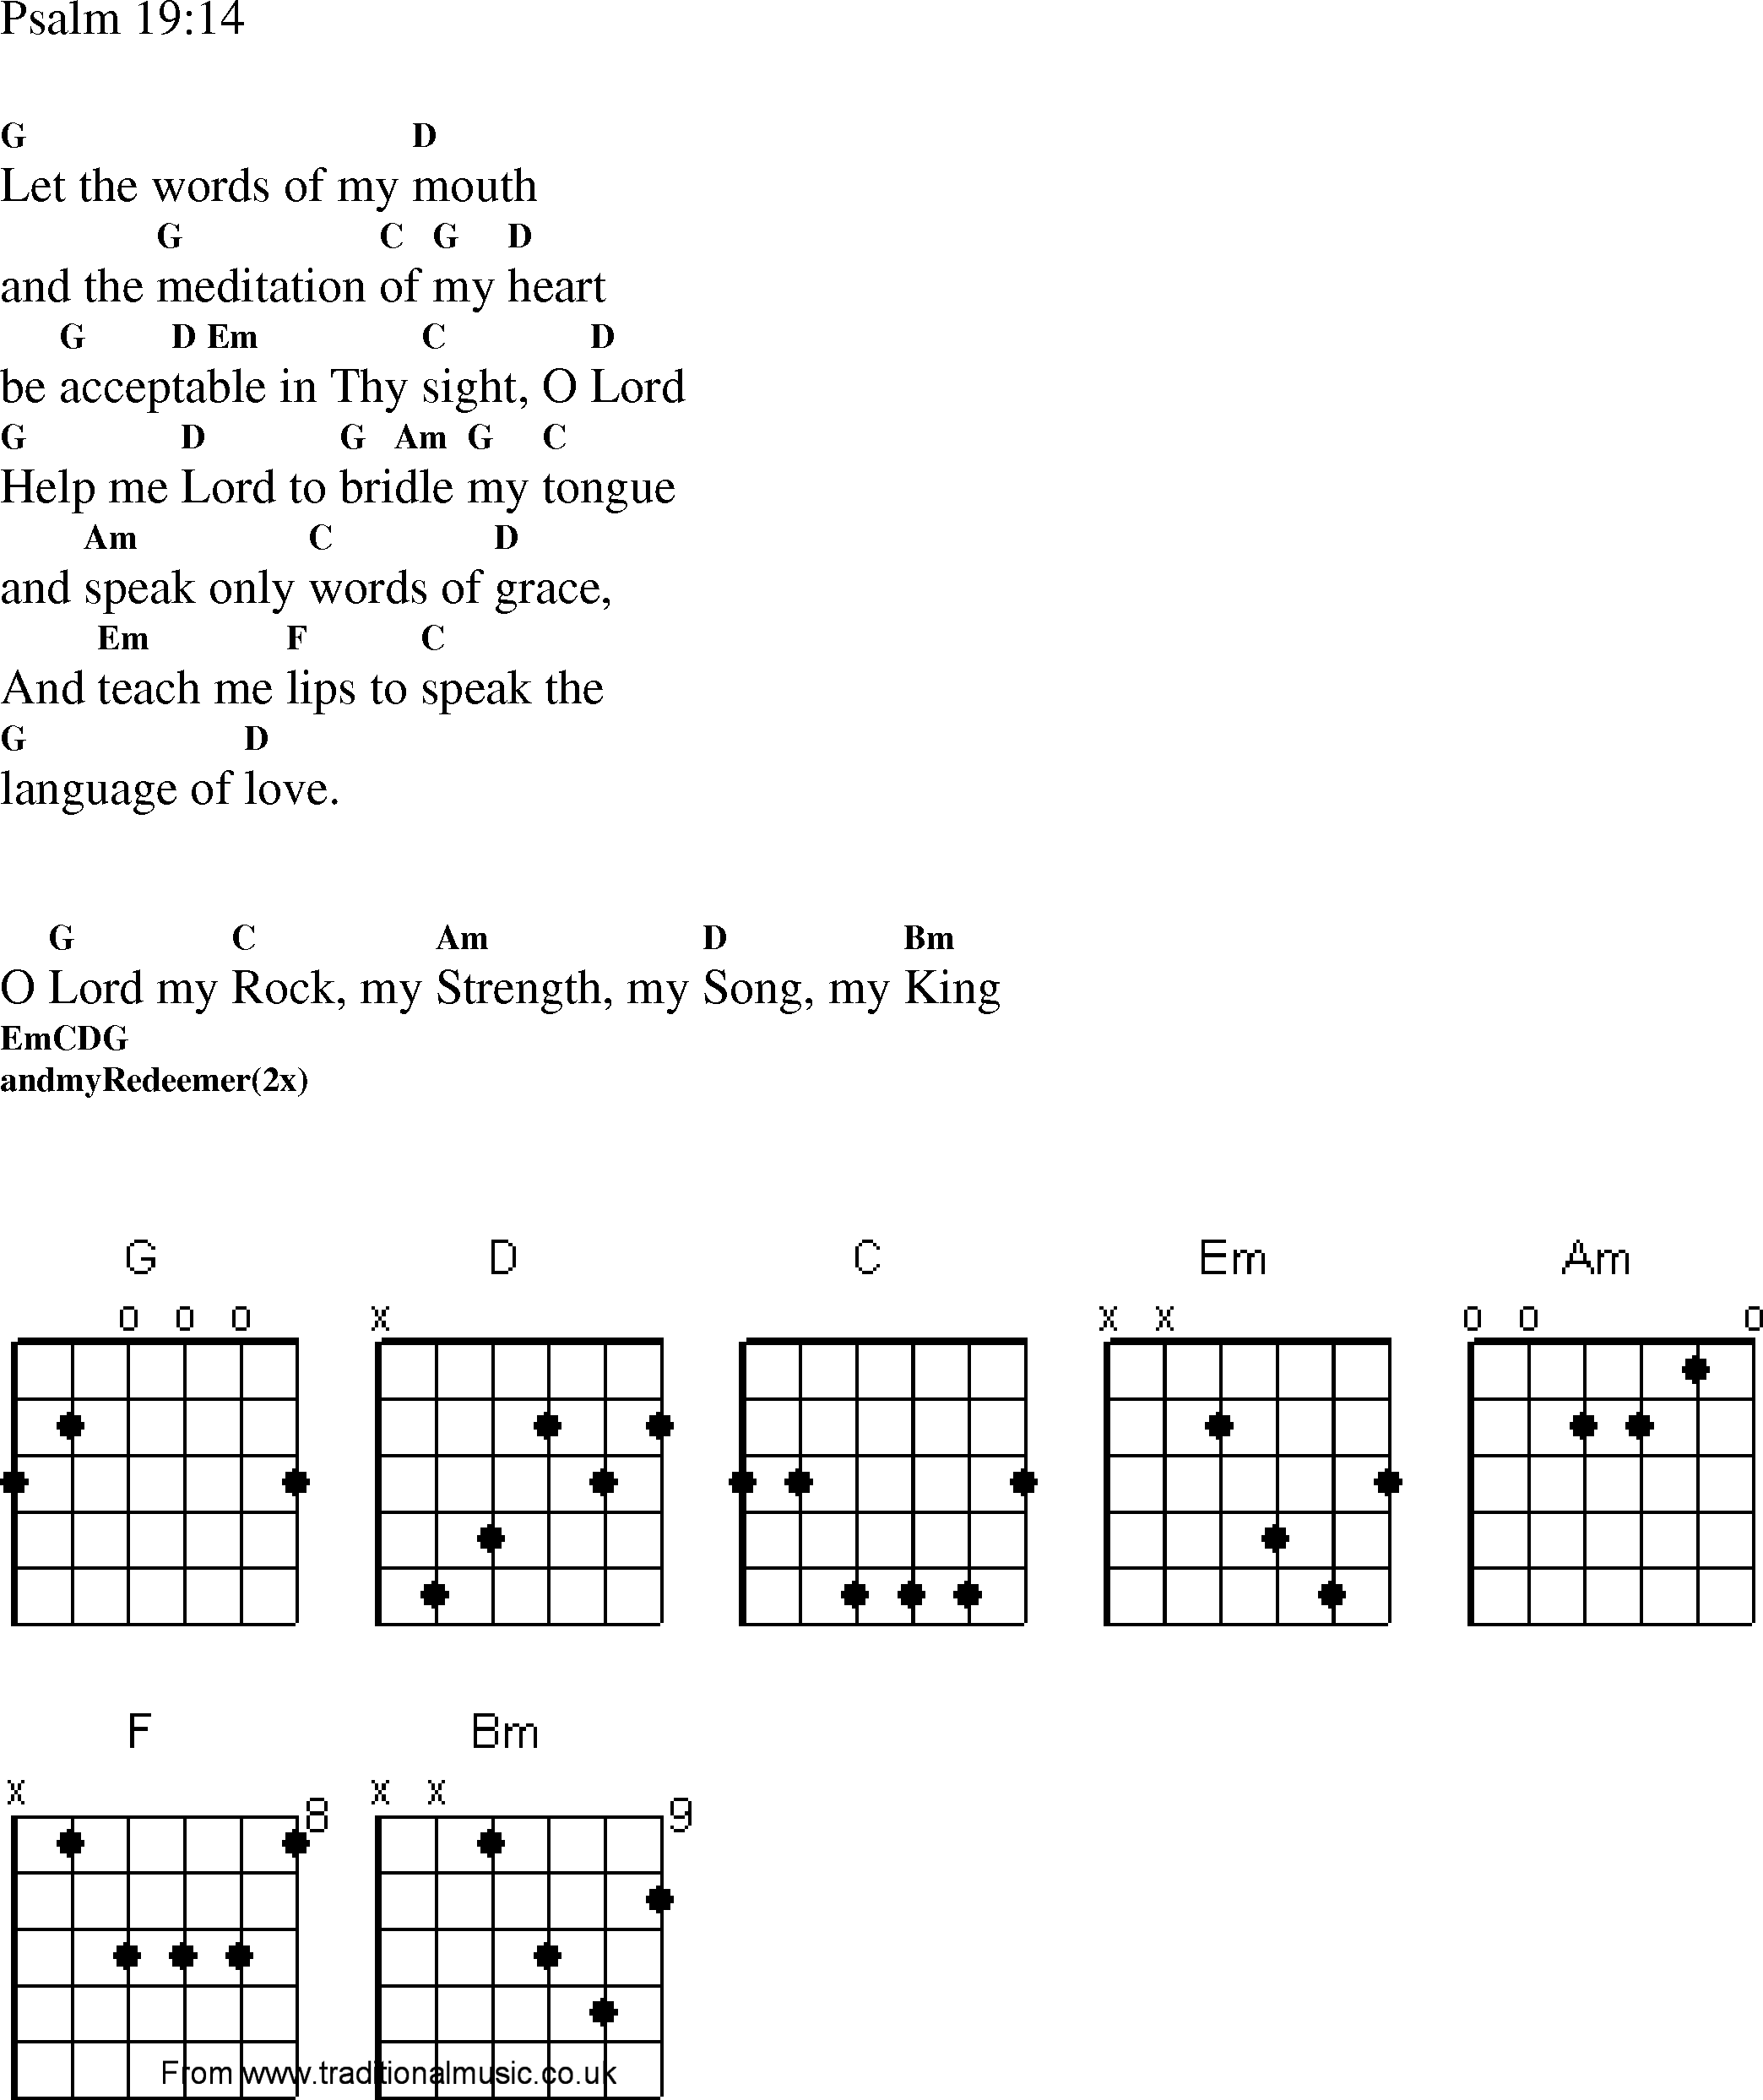 Christian Song with Chords - Psalm 19 14